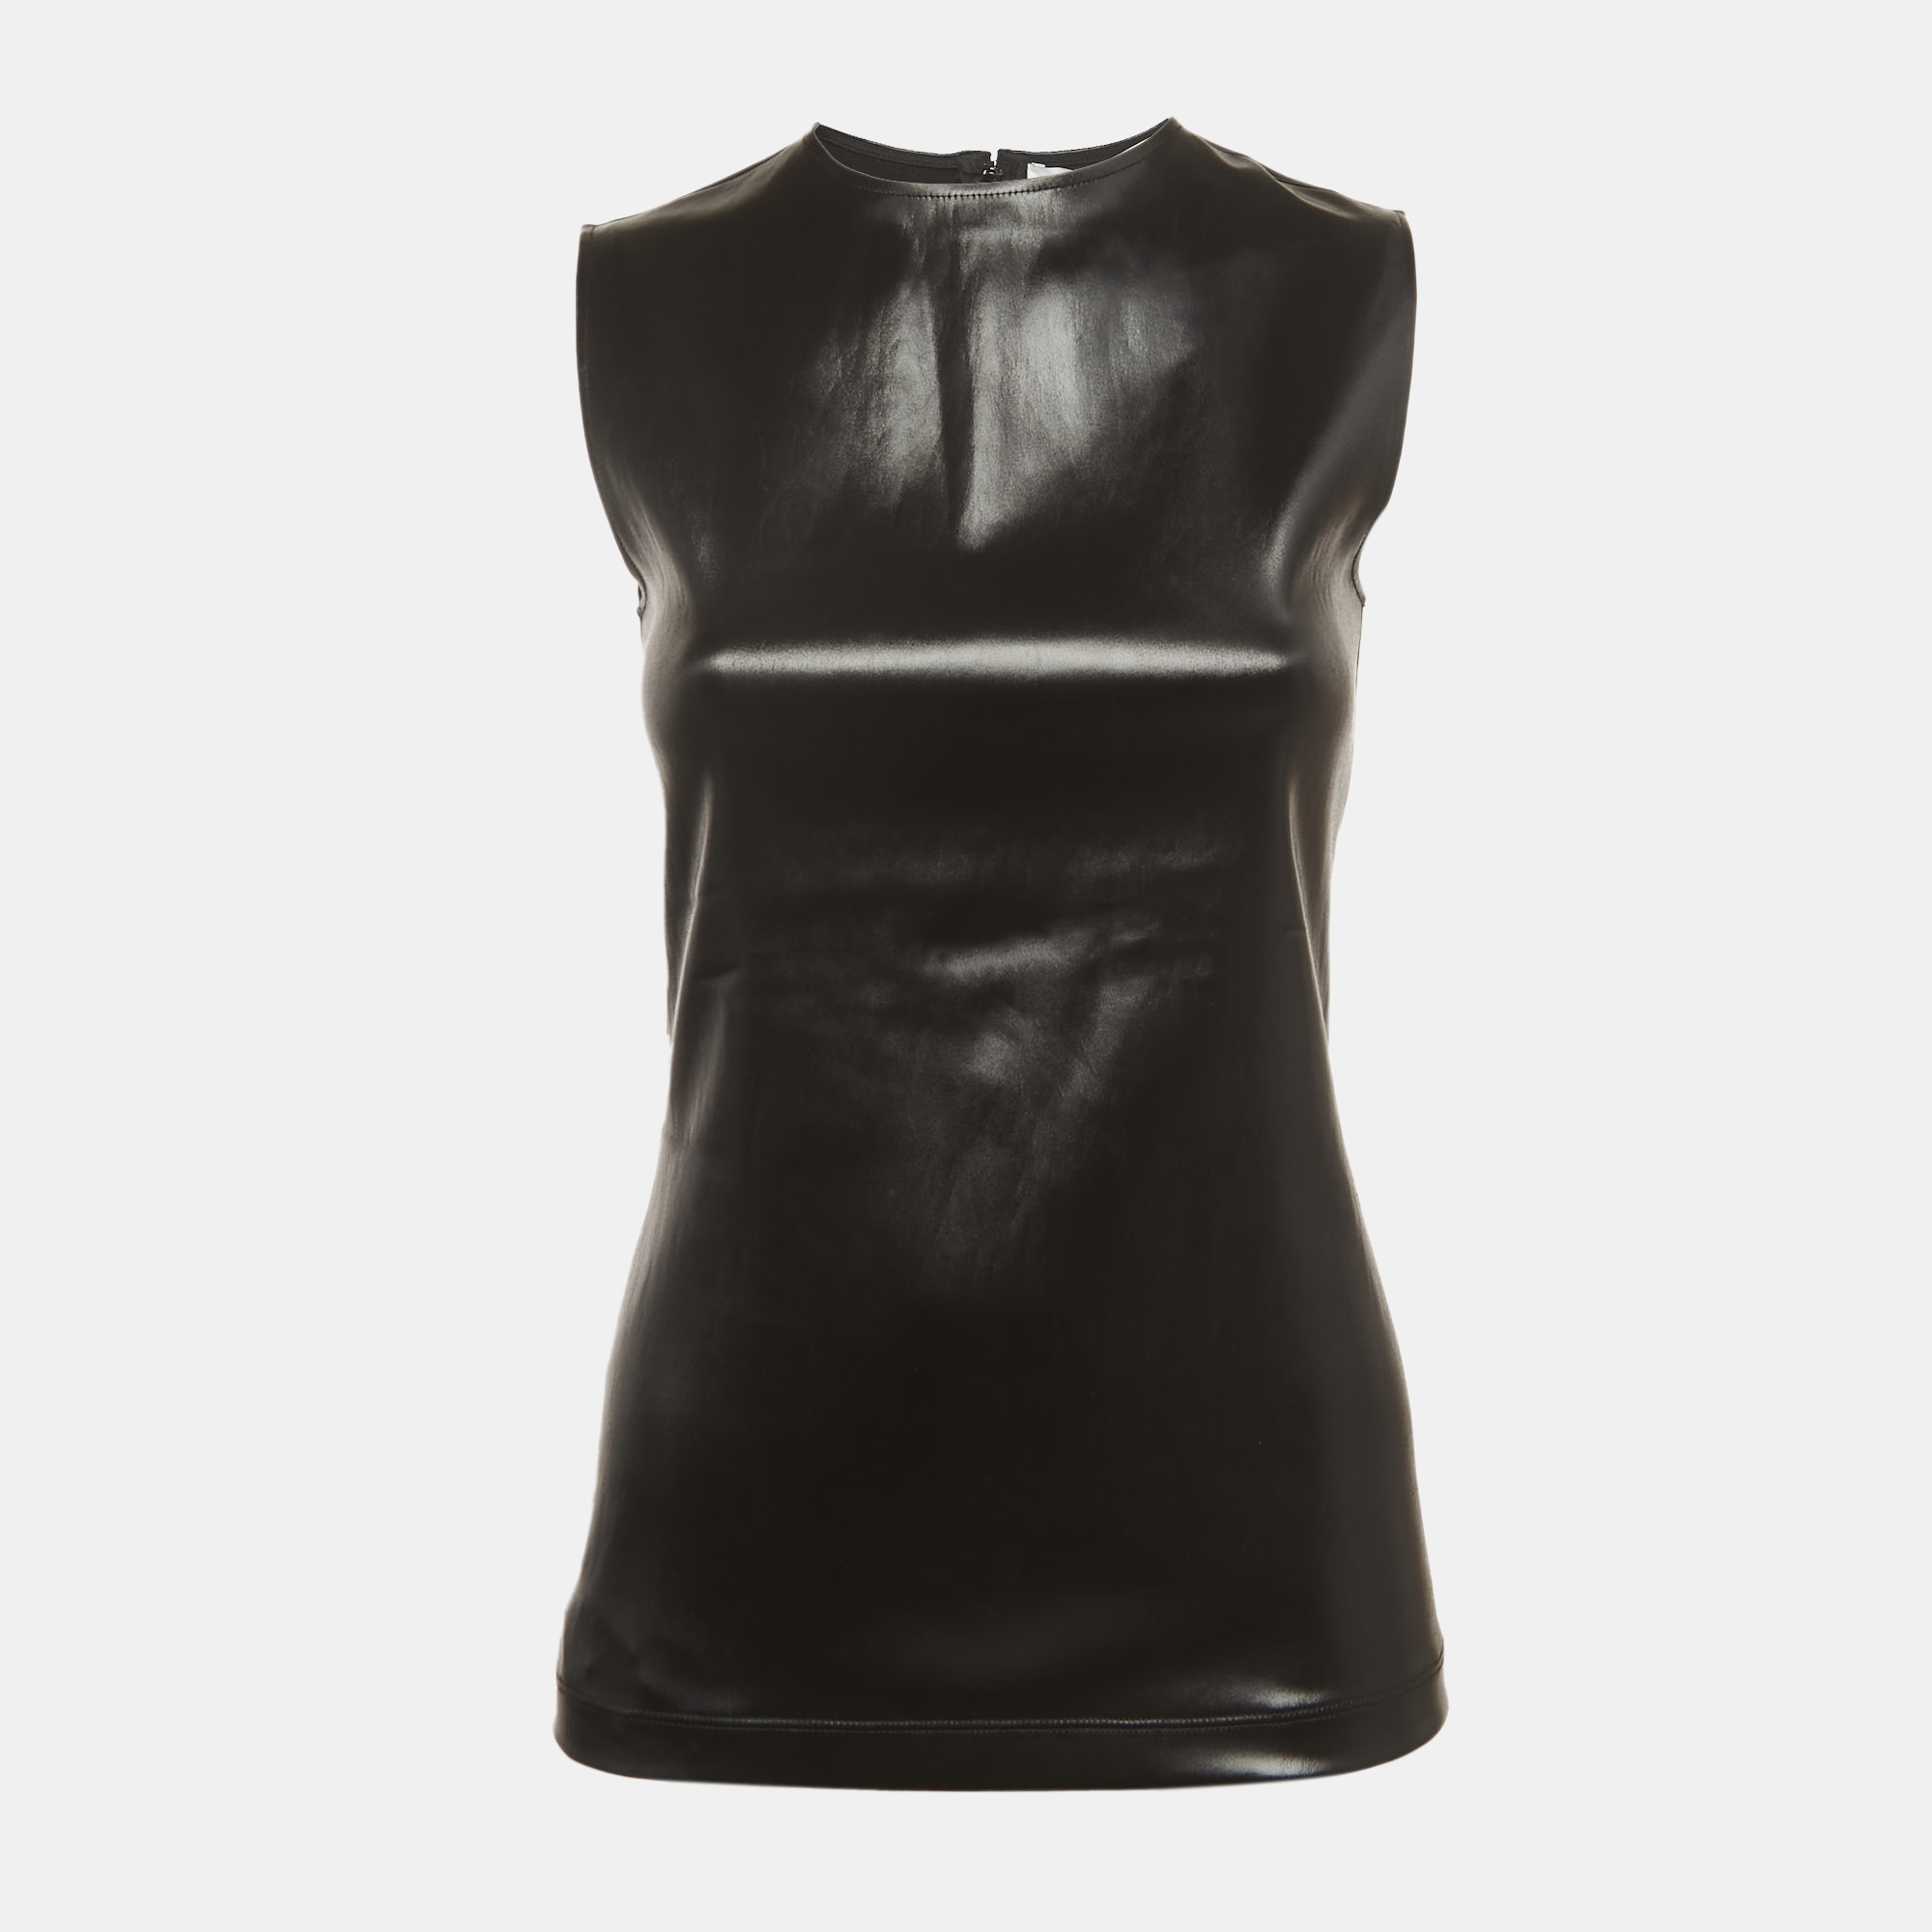 Pre-owned Givenchy Black Faux Leather Sleeveless Top S